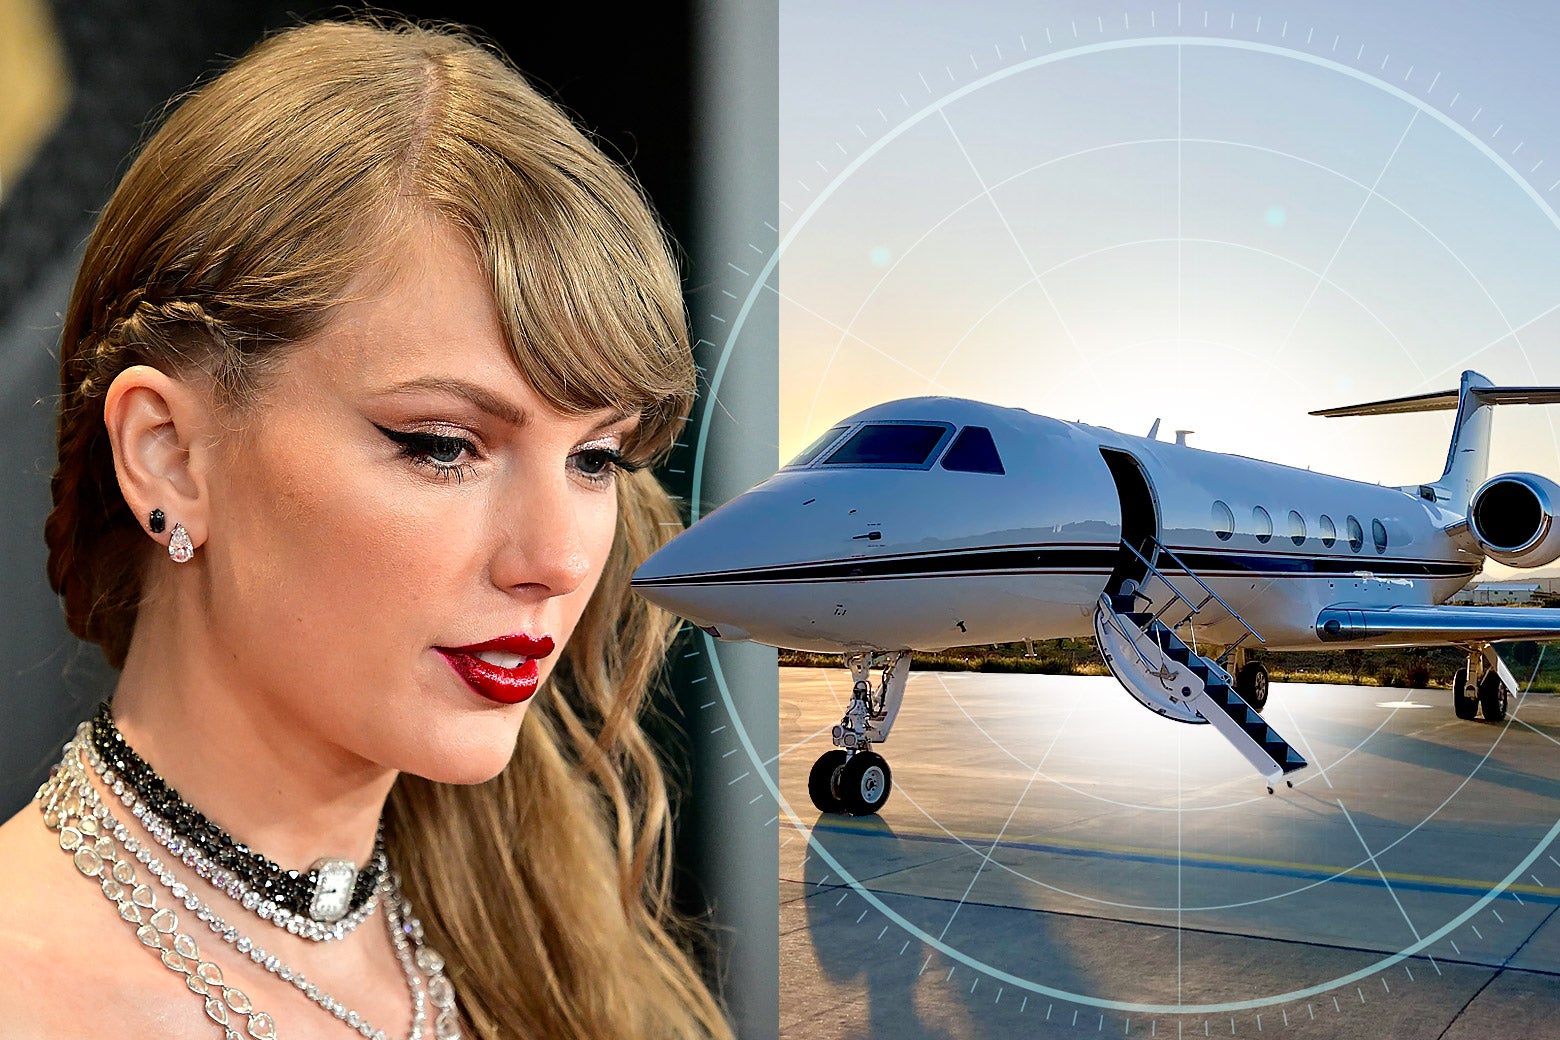 Taylor Swift private jet: Can she really sue the guy tracking her plane?